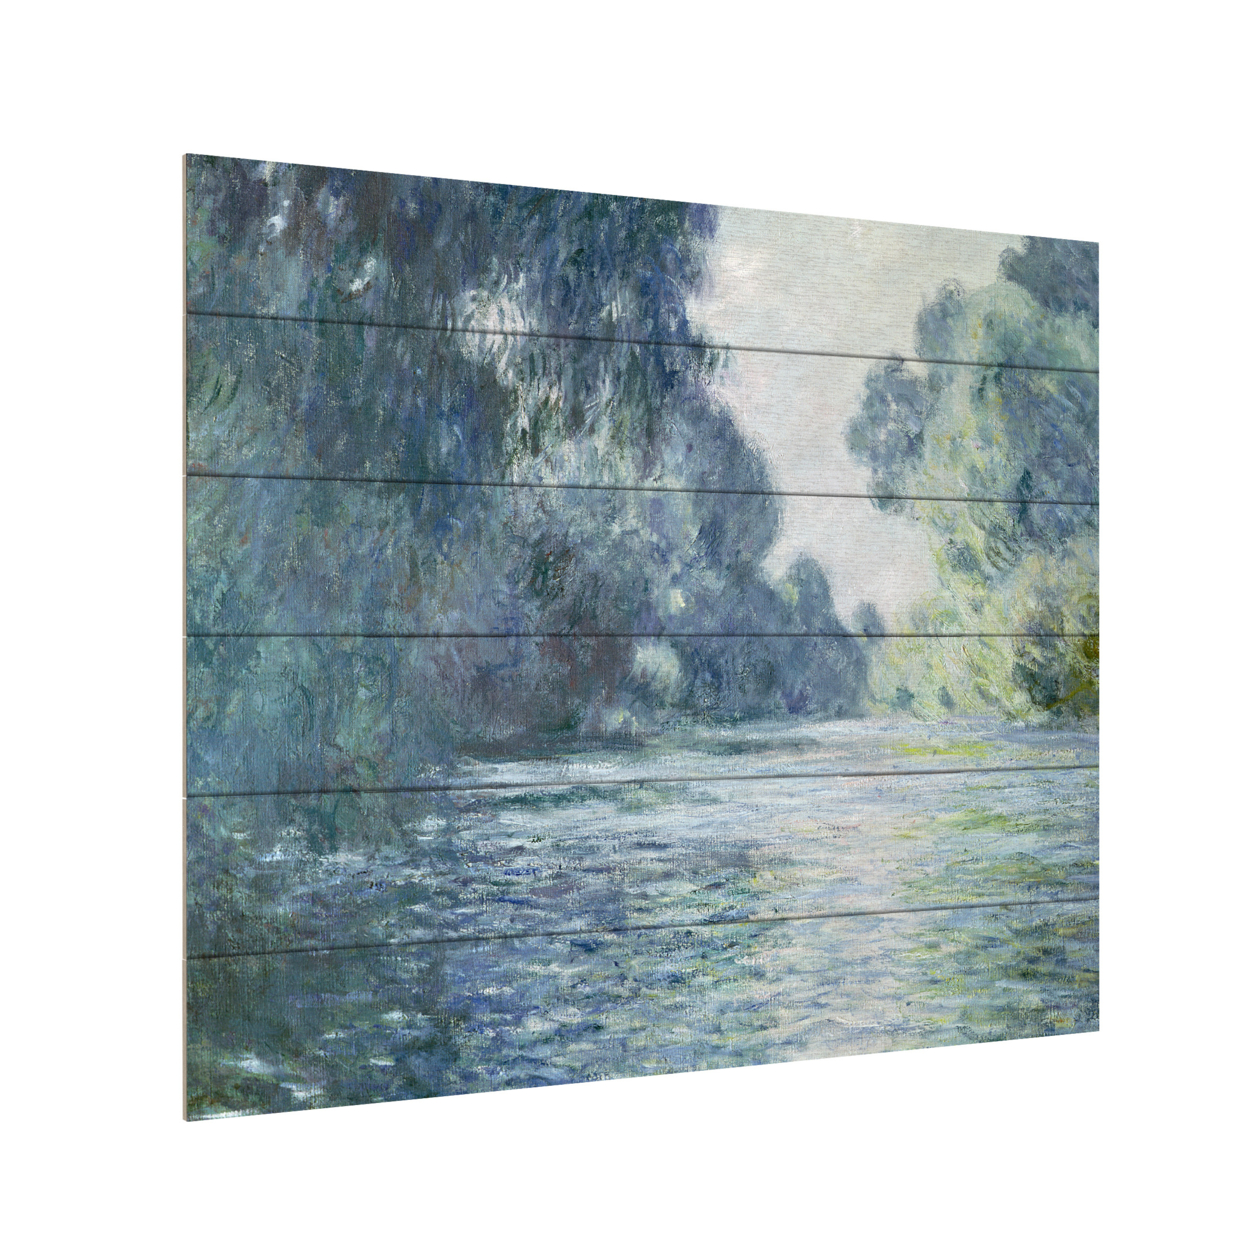 Wooden Slat Art 18 X 22 Inches Titled Branch Of The Seine Ready To Hang Home Decor Picture